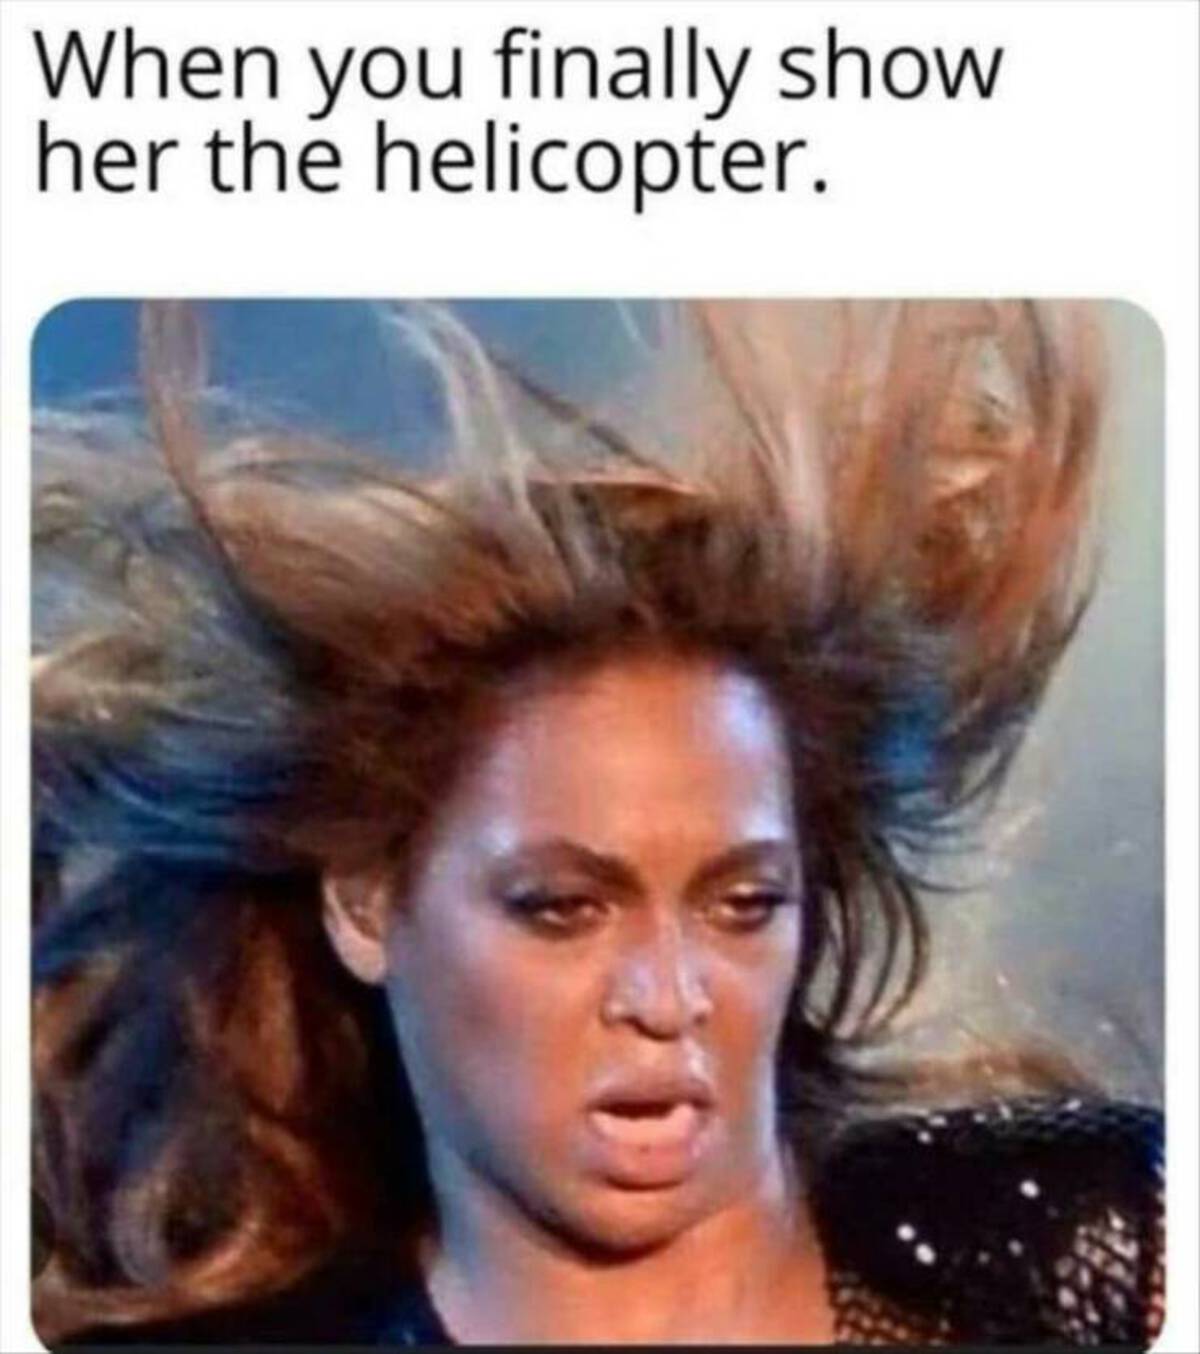 beyonce oven - When you finally show her the helicopter.